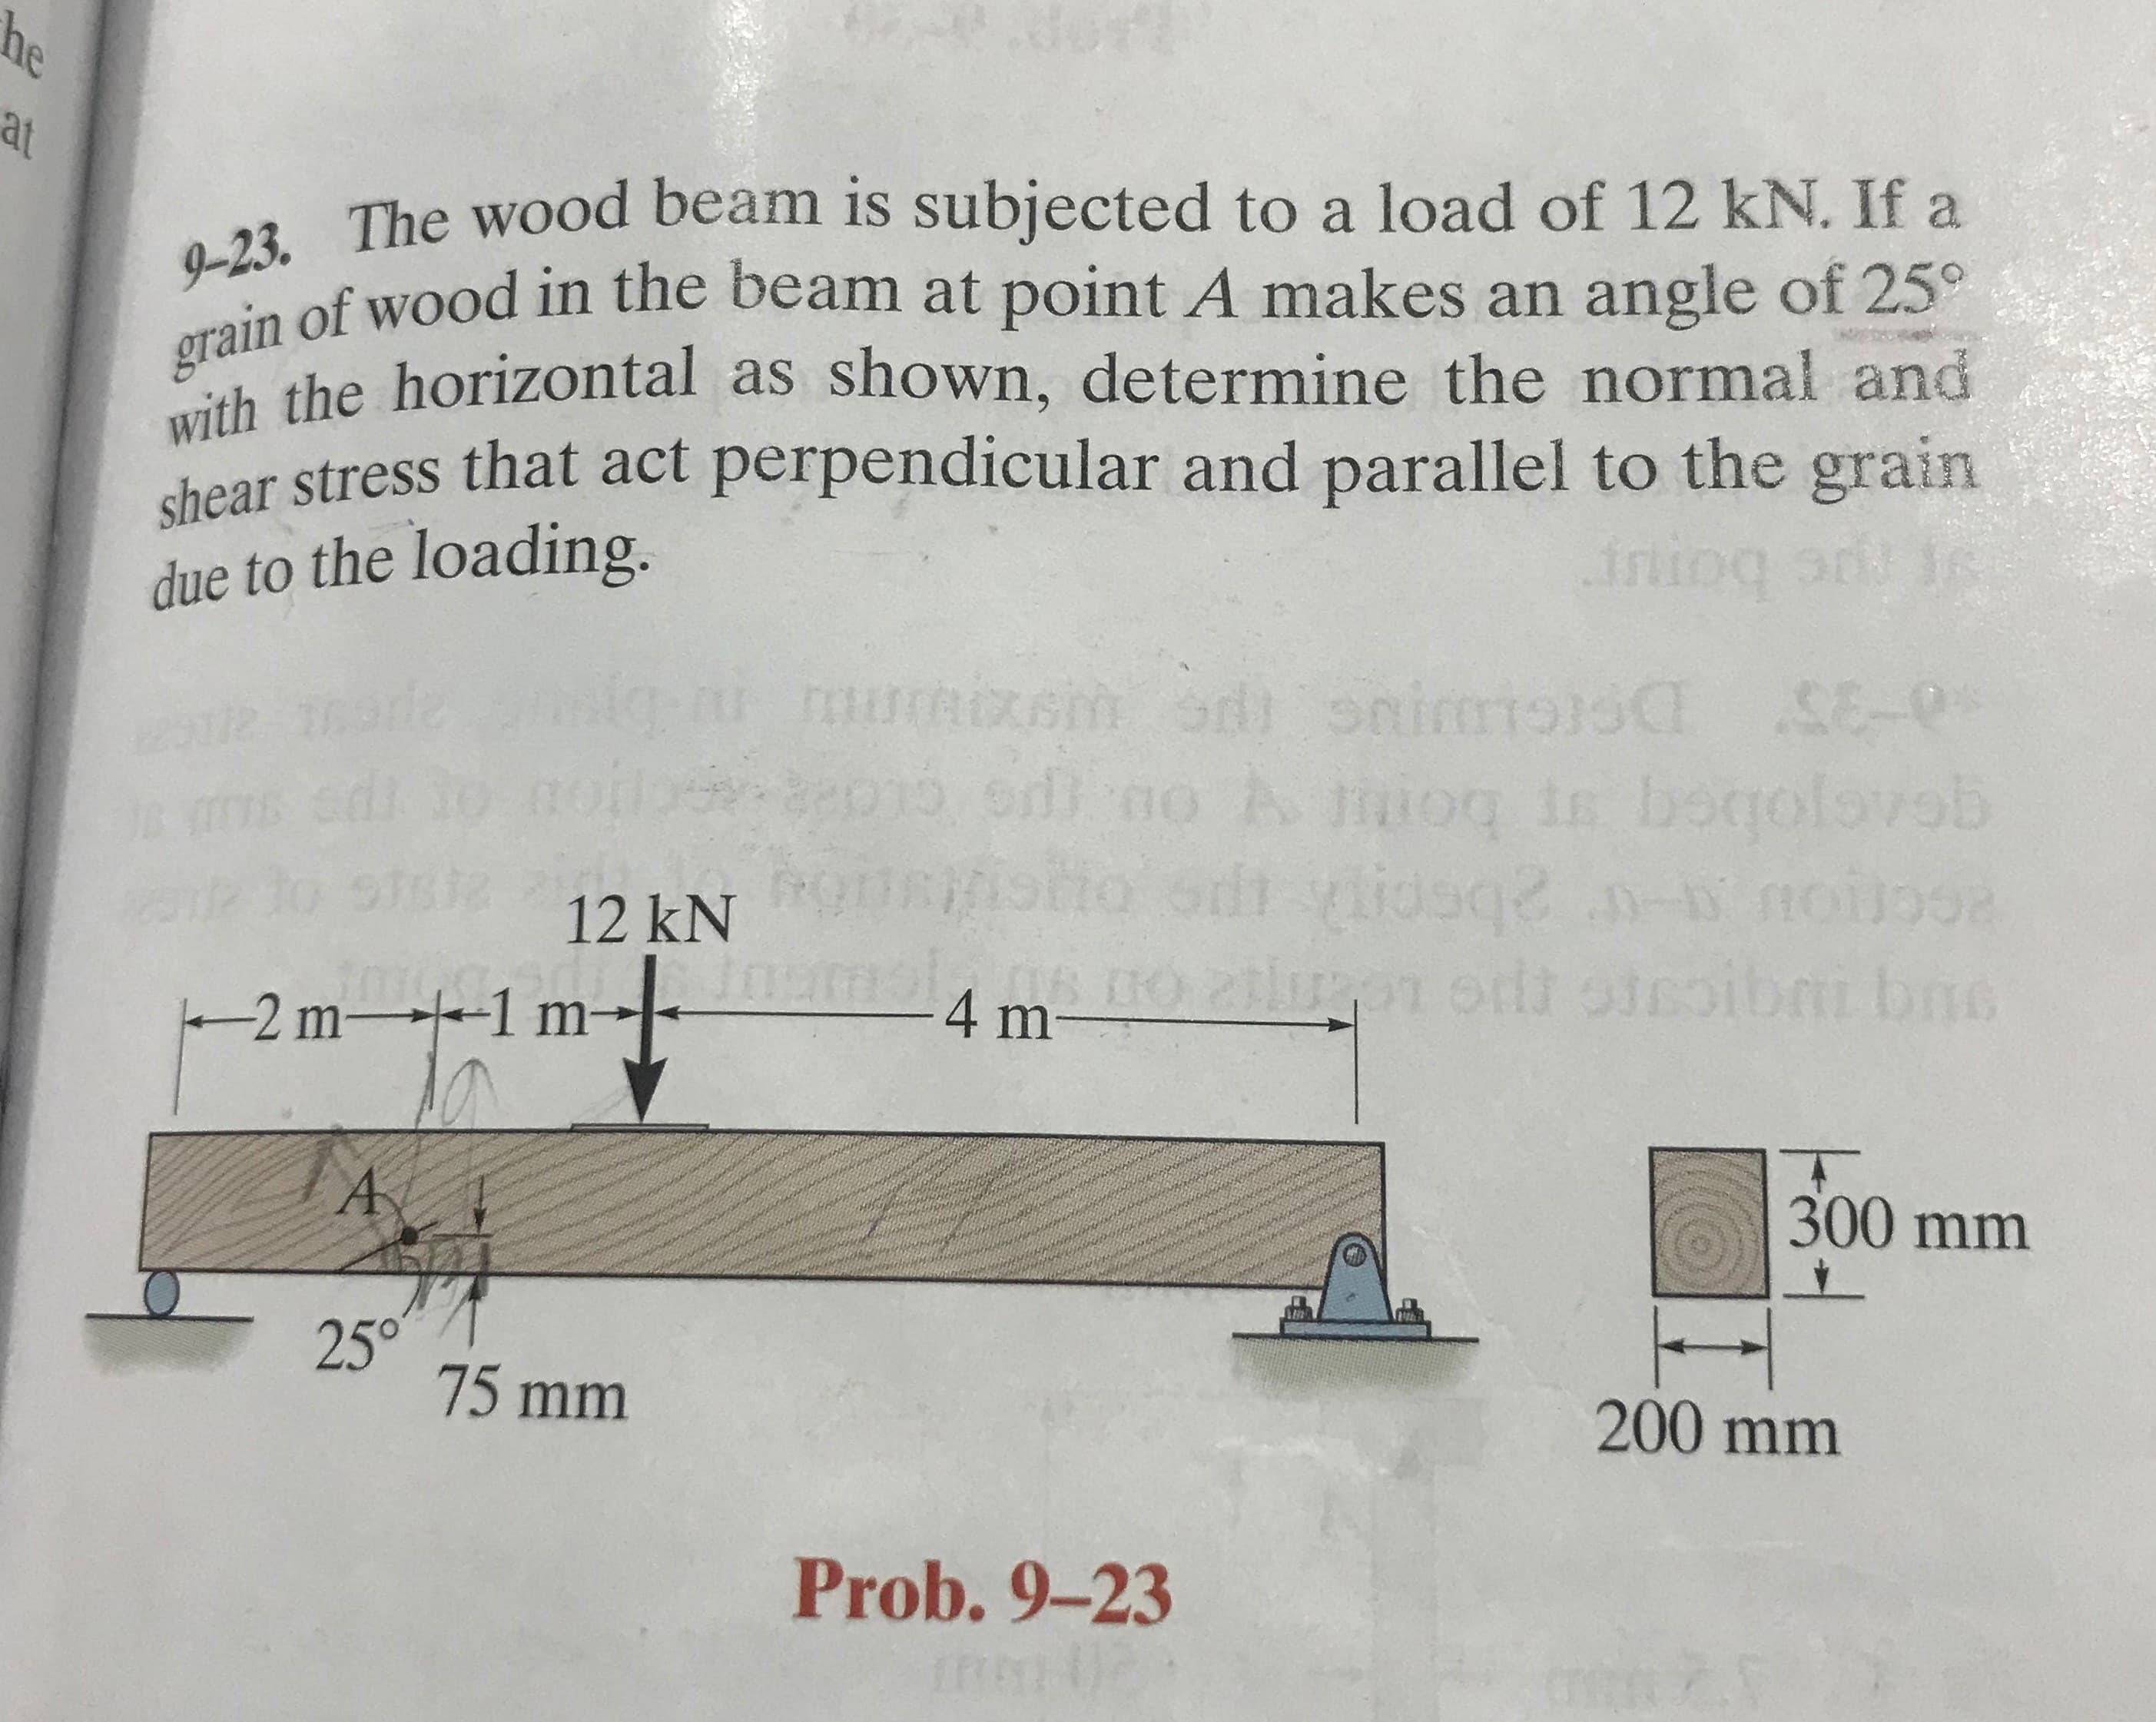 9-23. The wood beam is subjected to a load of 12 kN. If a
of wood in the beam at point A makes an angle of 25°
h the horizontal as shown, determine the normal and
chear stress that act perpendicular and parallel to the grain
due to the loading.
